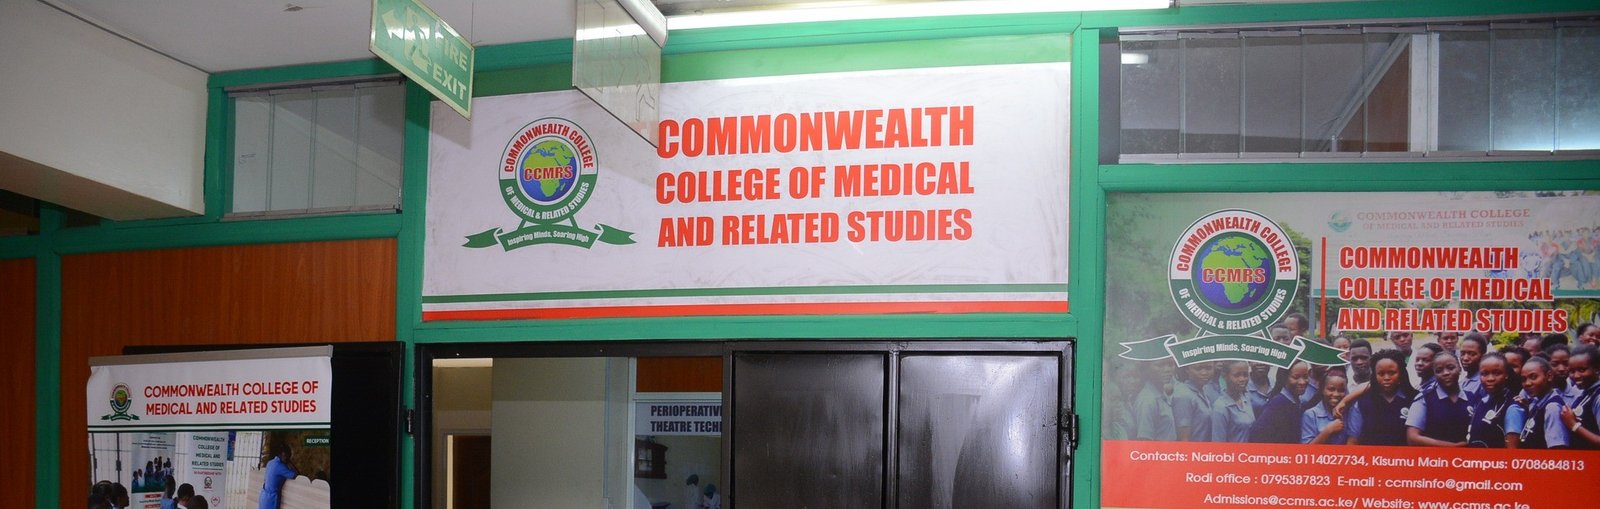 Commonwealth Certificate in Nutrition and Dietetics